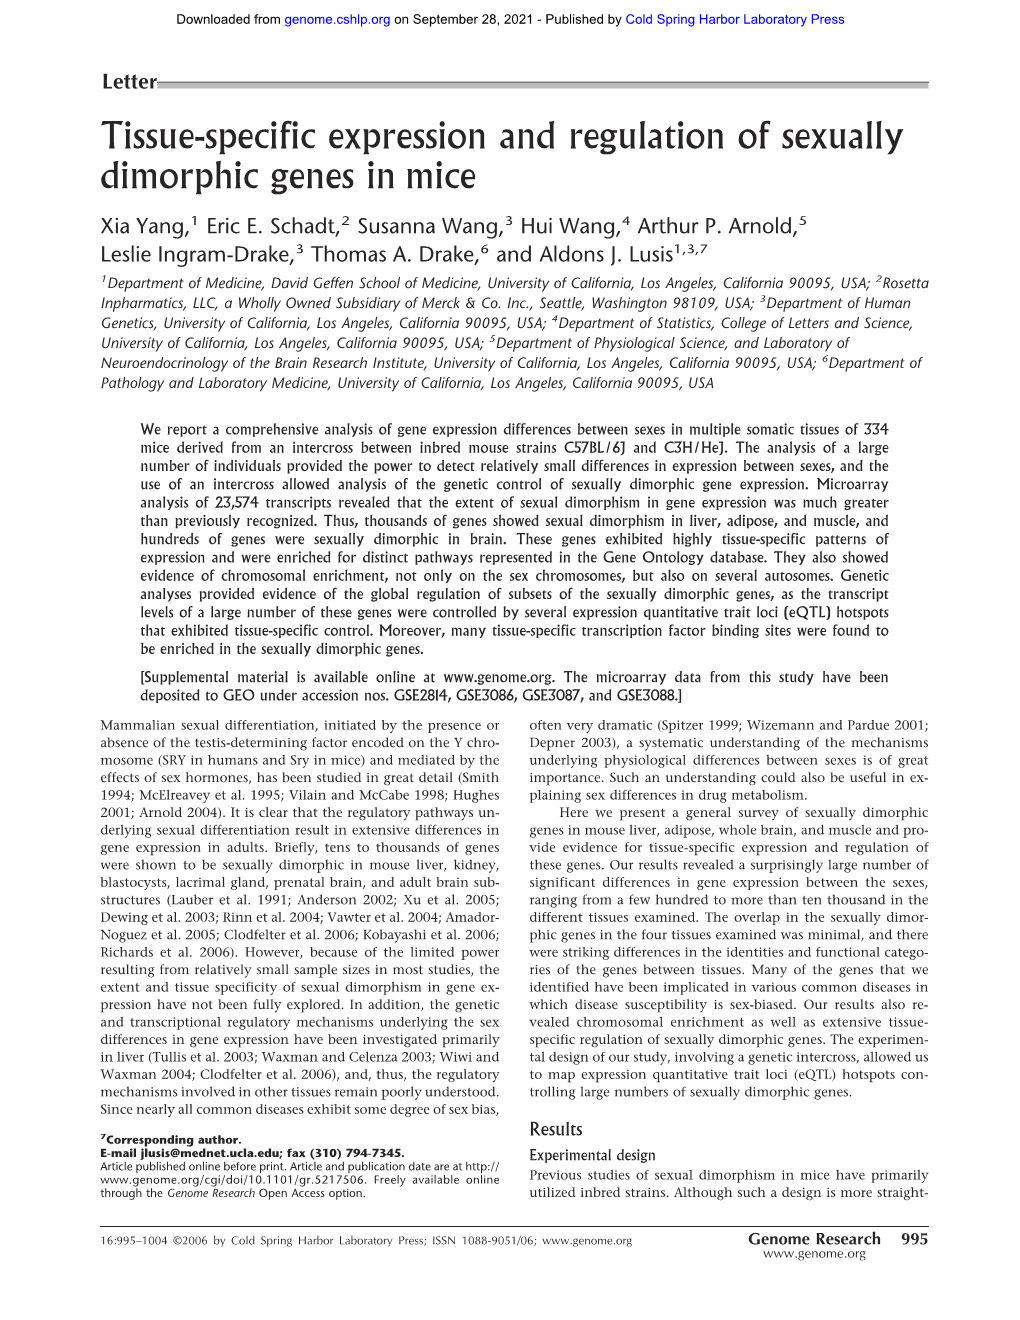 Tissue-Specific Expression and Regulation of Sexually Dimorphic Genes in Mice